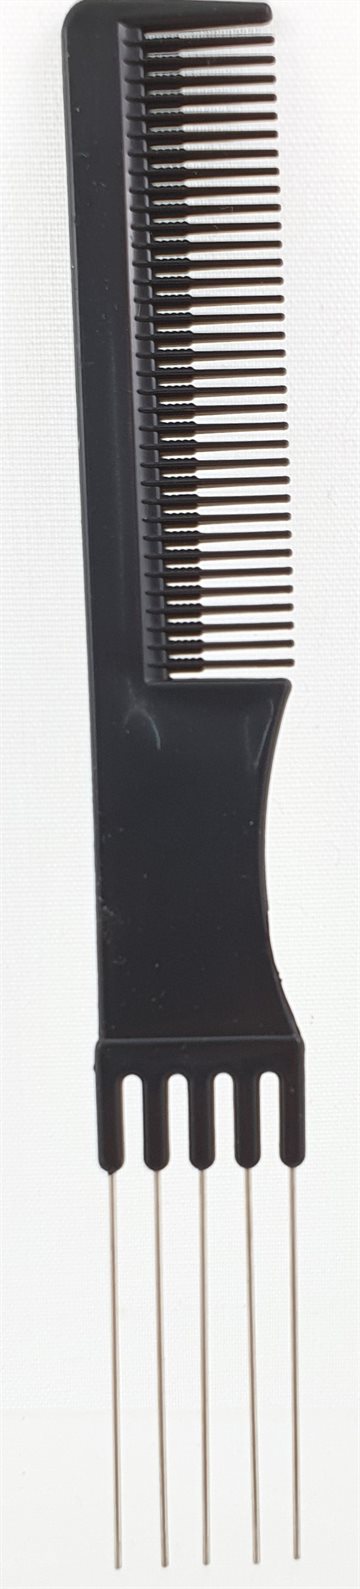 Hair Comb Double side. (UDSOLGT)